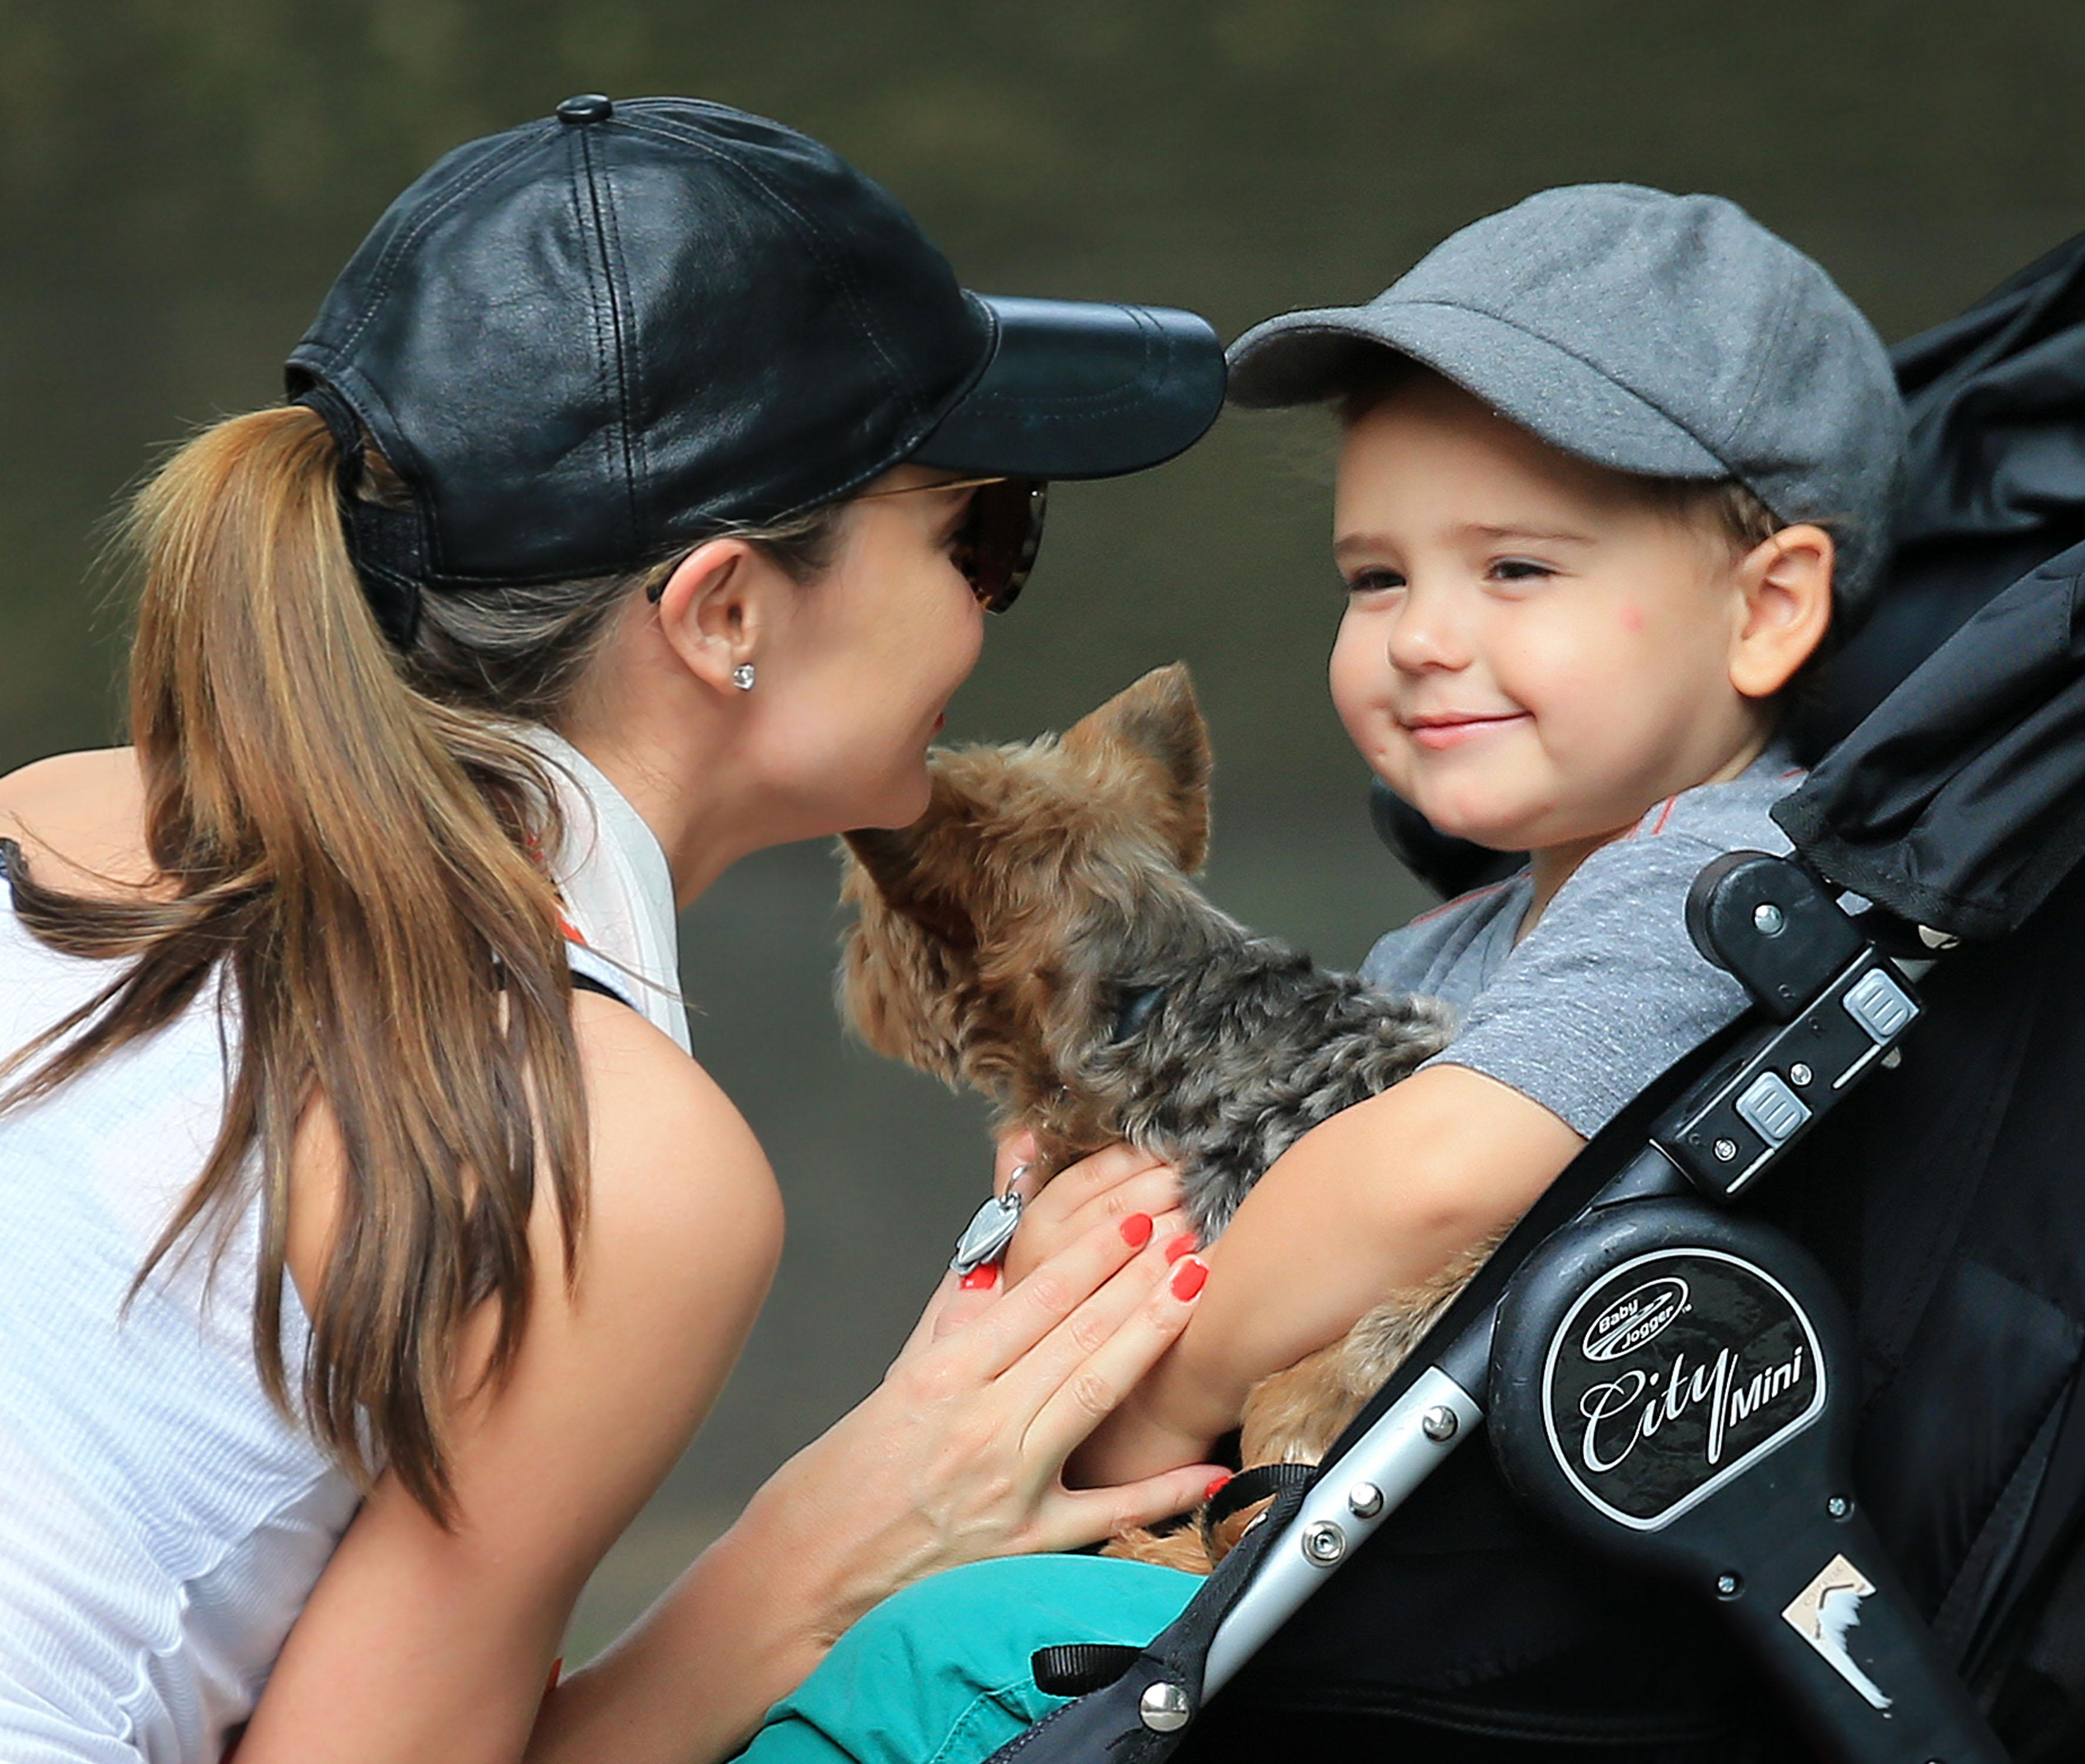 Flynn Bloom hugs and kisses his puppy Frankie while mom Miranda Kerr looks on tenderly in Central Park, NY